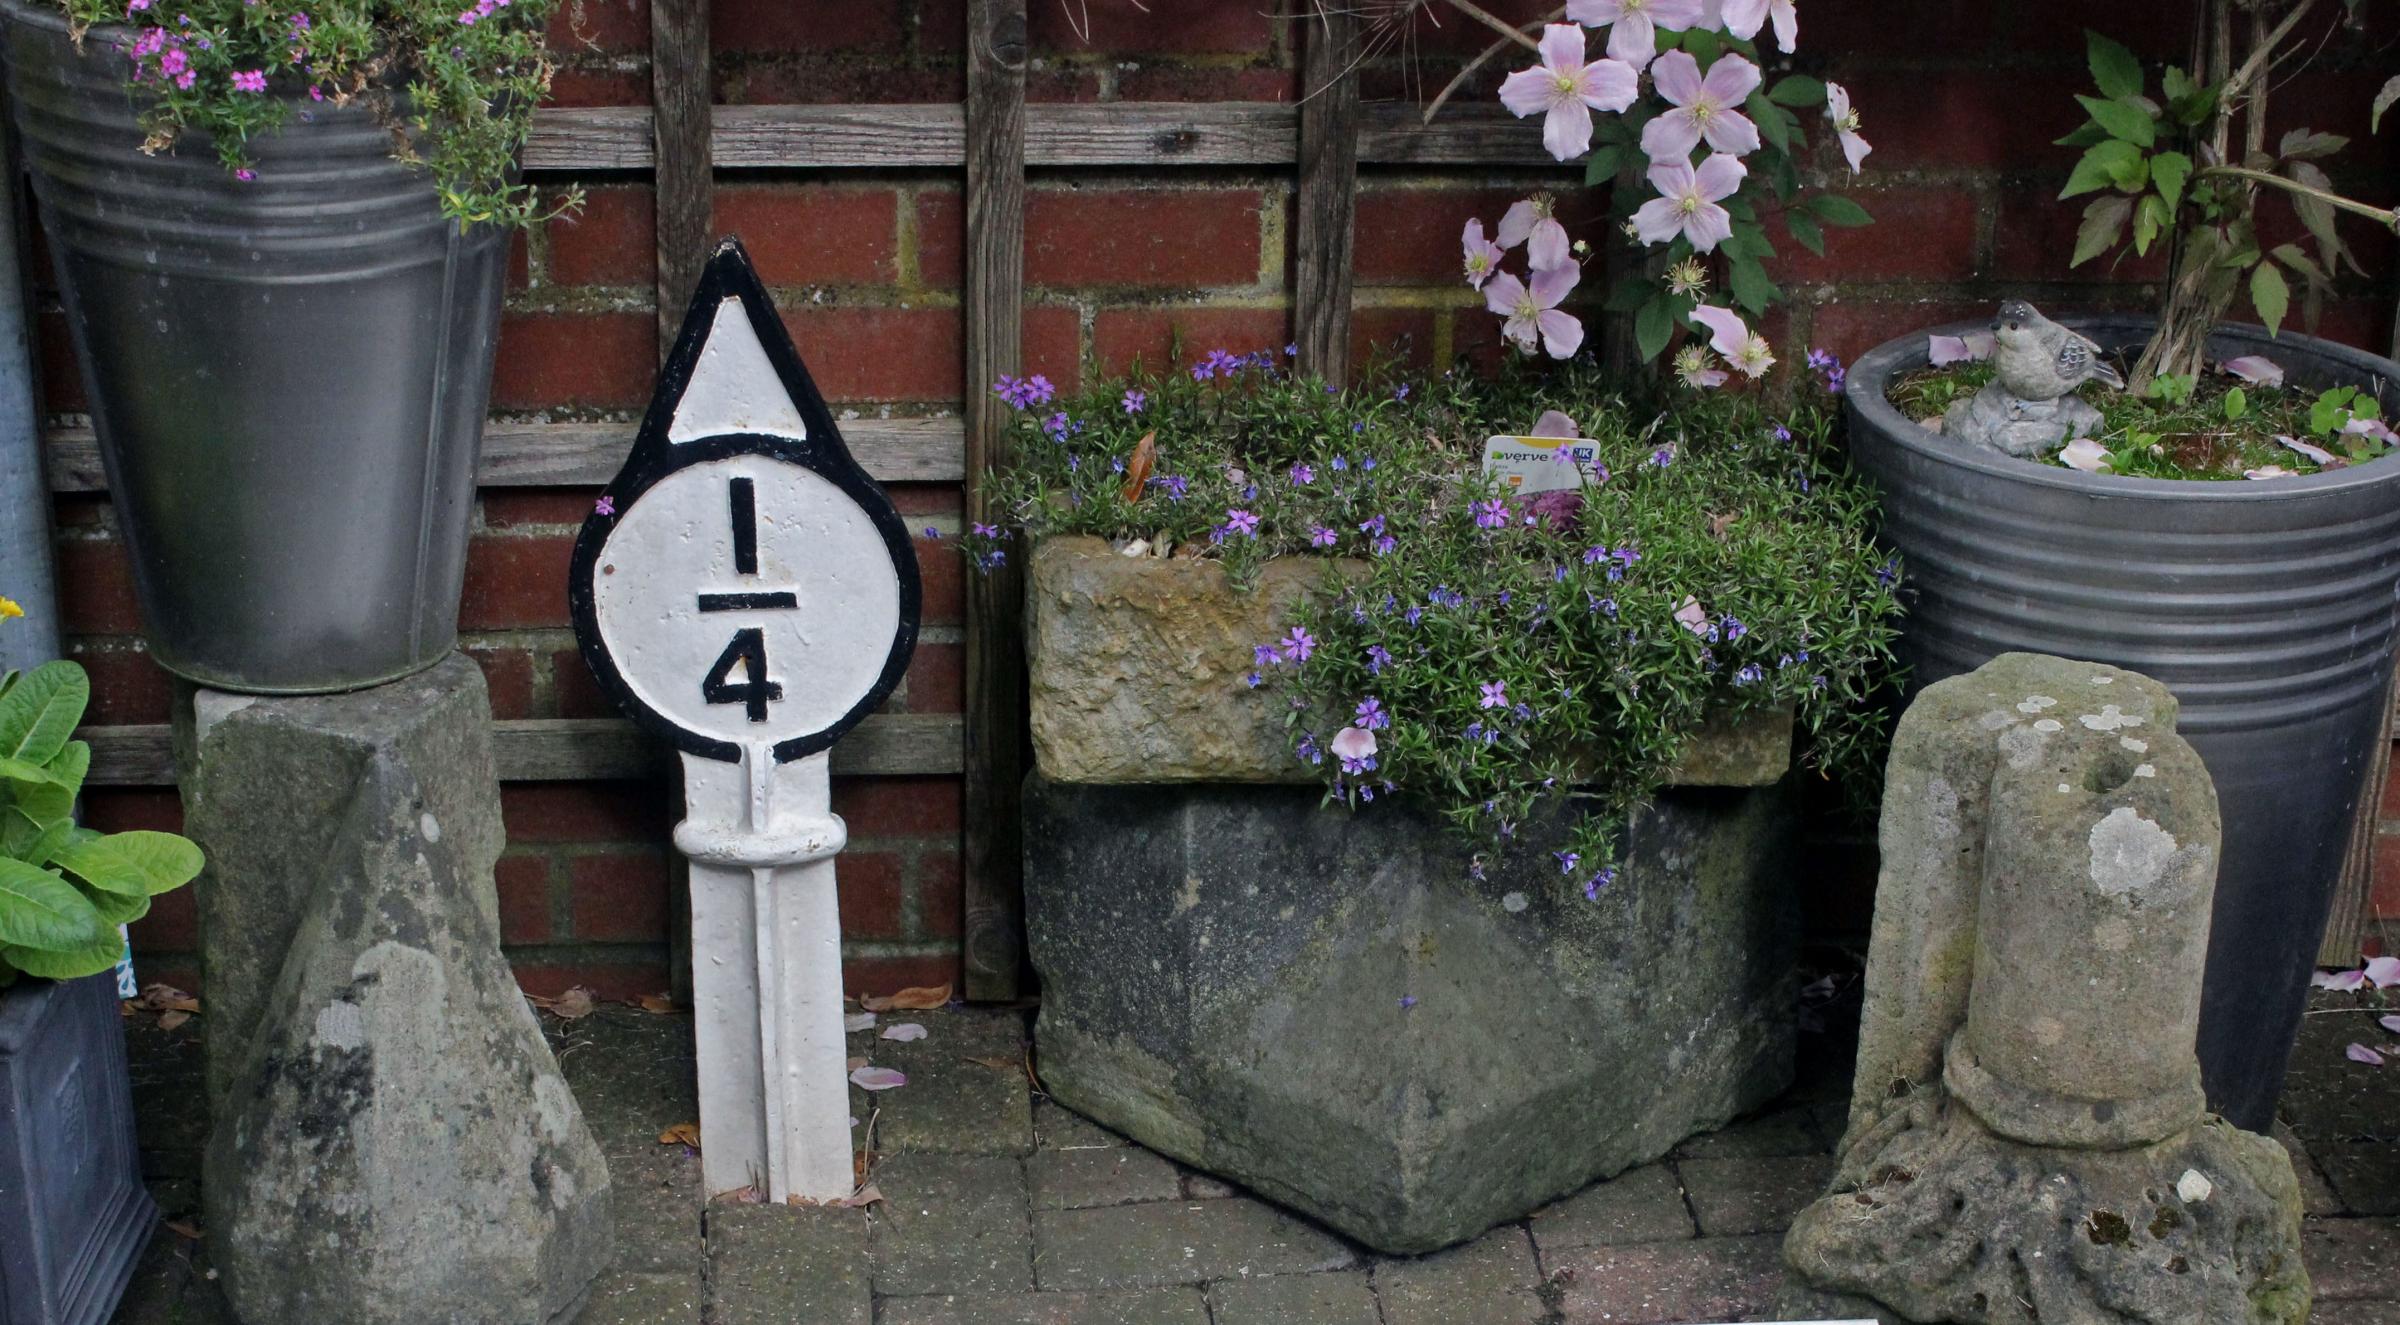 The south Northallerton quarter-of-a-milepost is now in a garden in Darlington